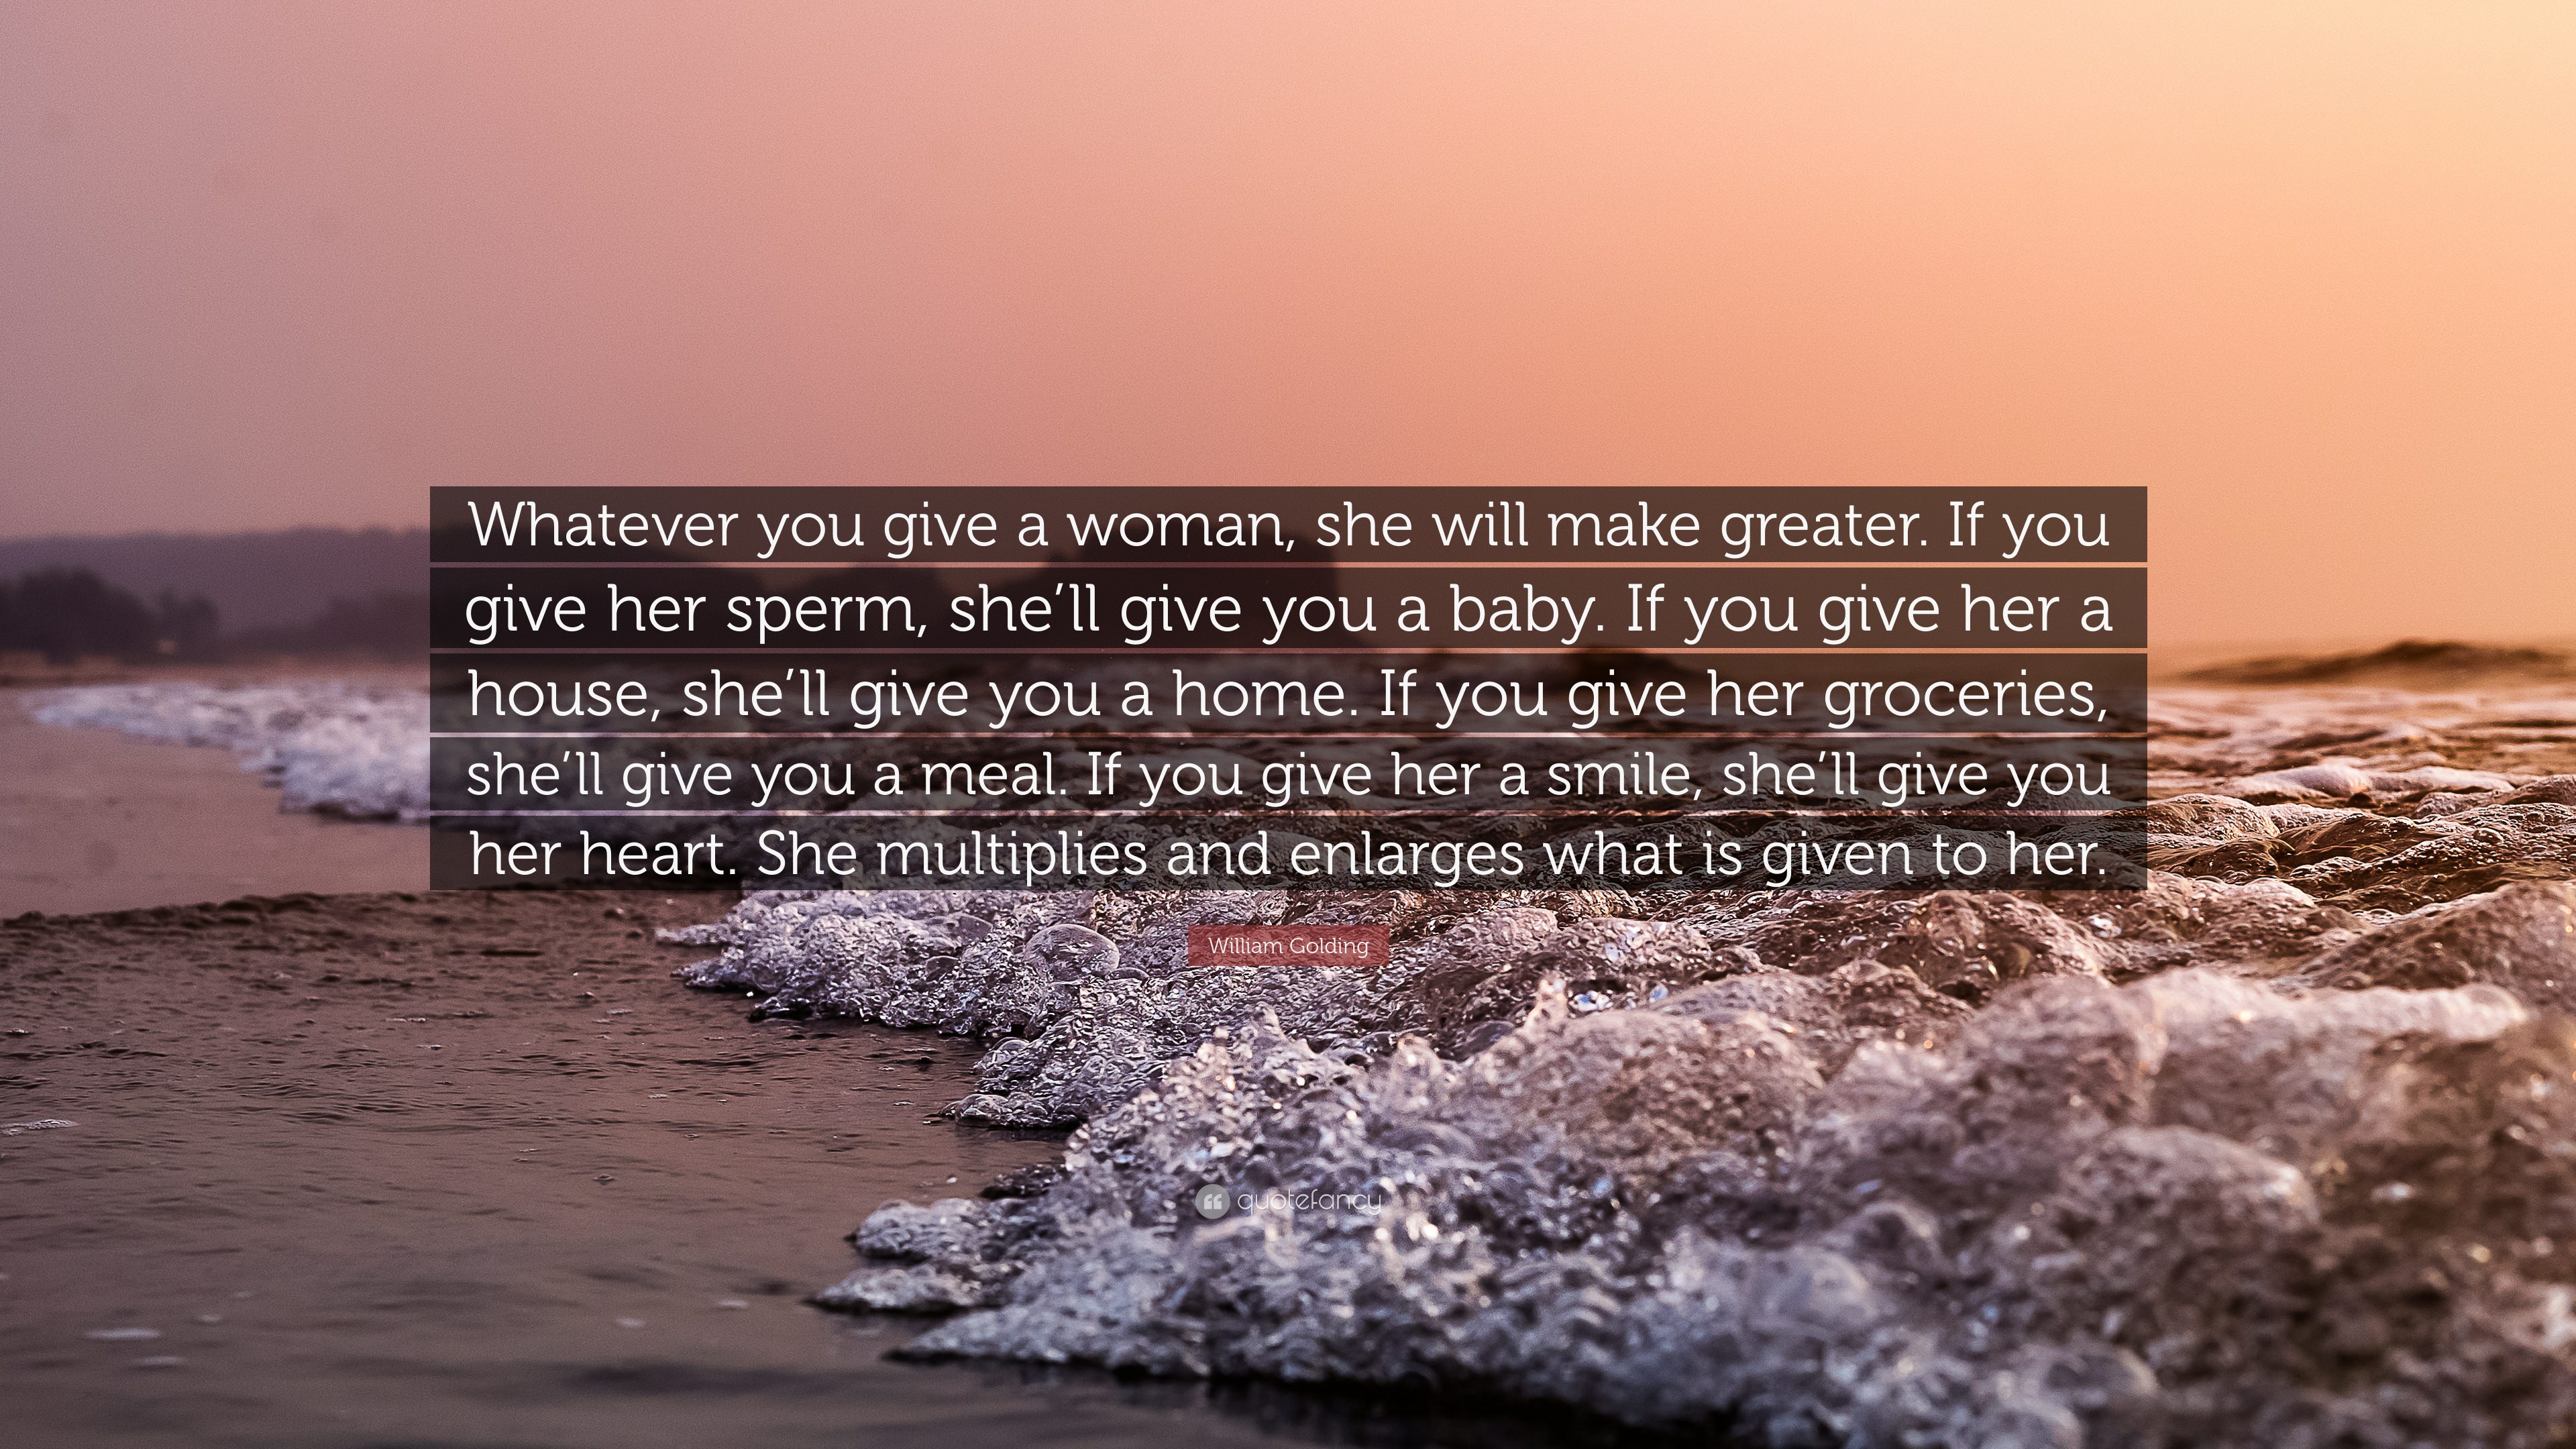 Whatever a give woman you william golding Quote by